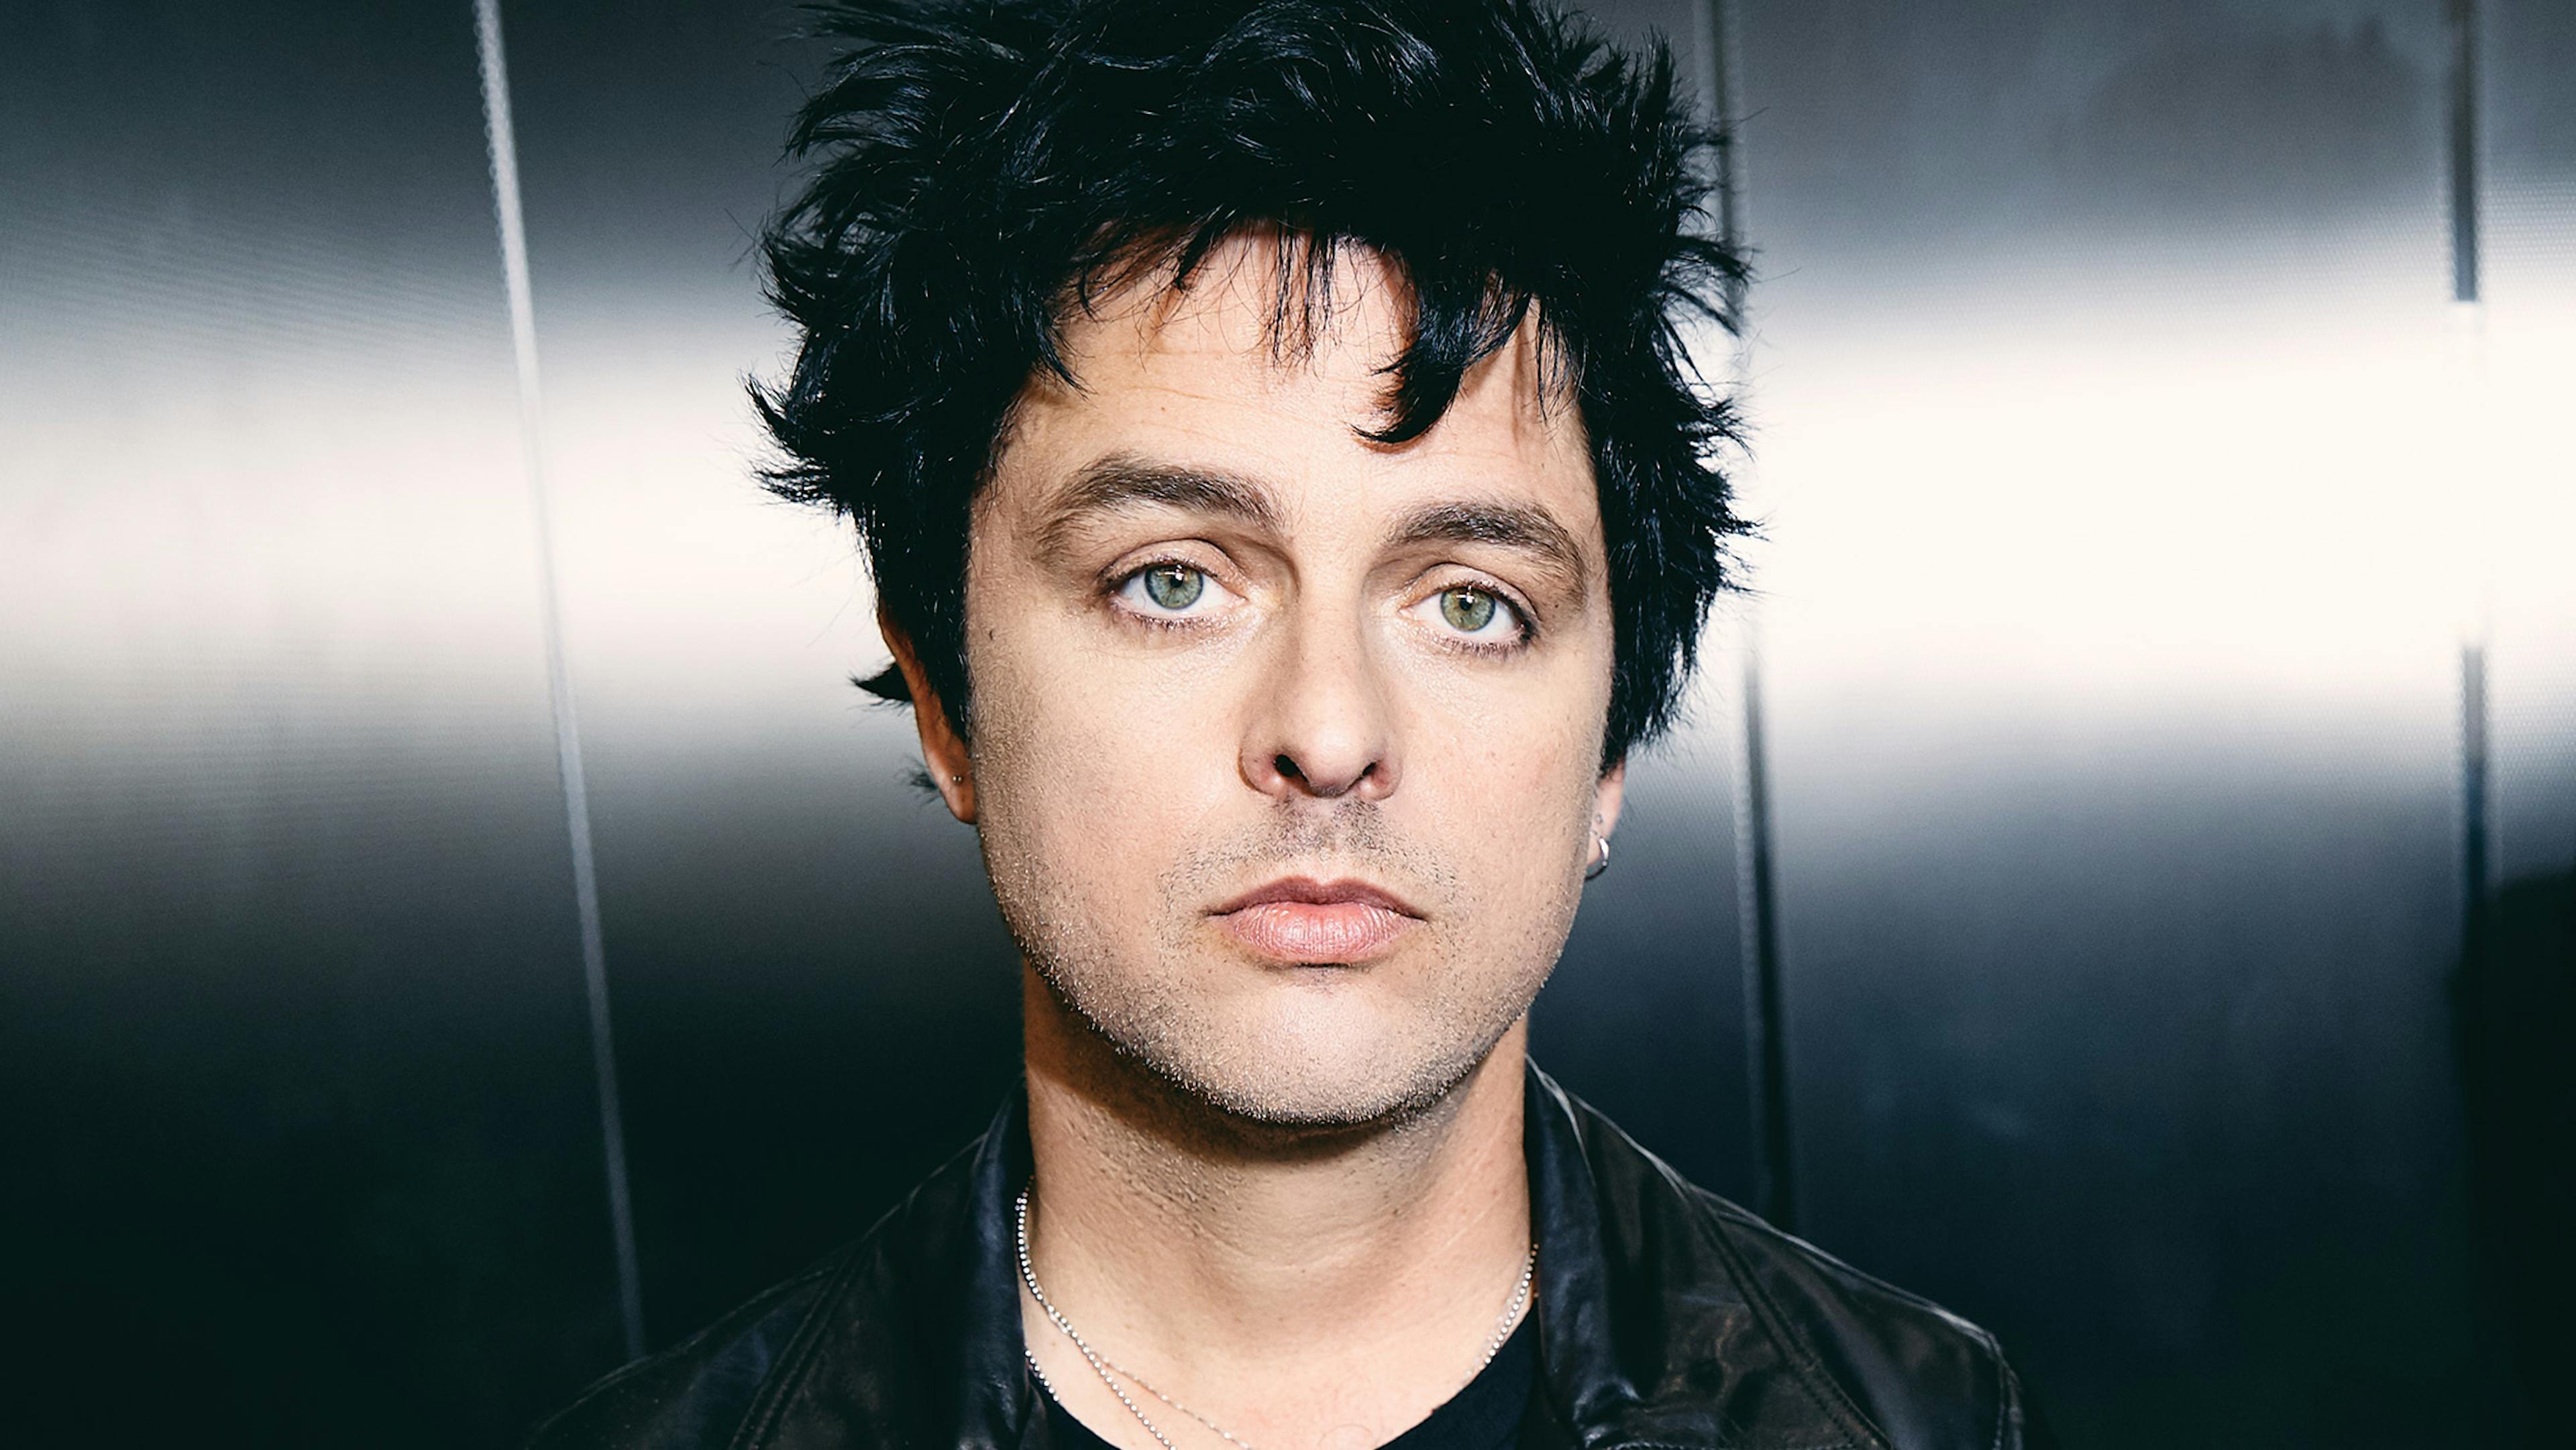 Billie Joe Armstrong On Controversial Morrissey Collab: "I Really Did Not Have A Clue…"